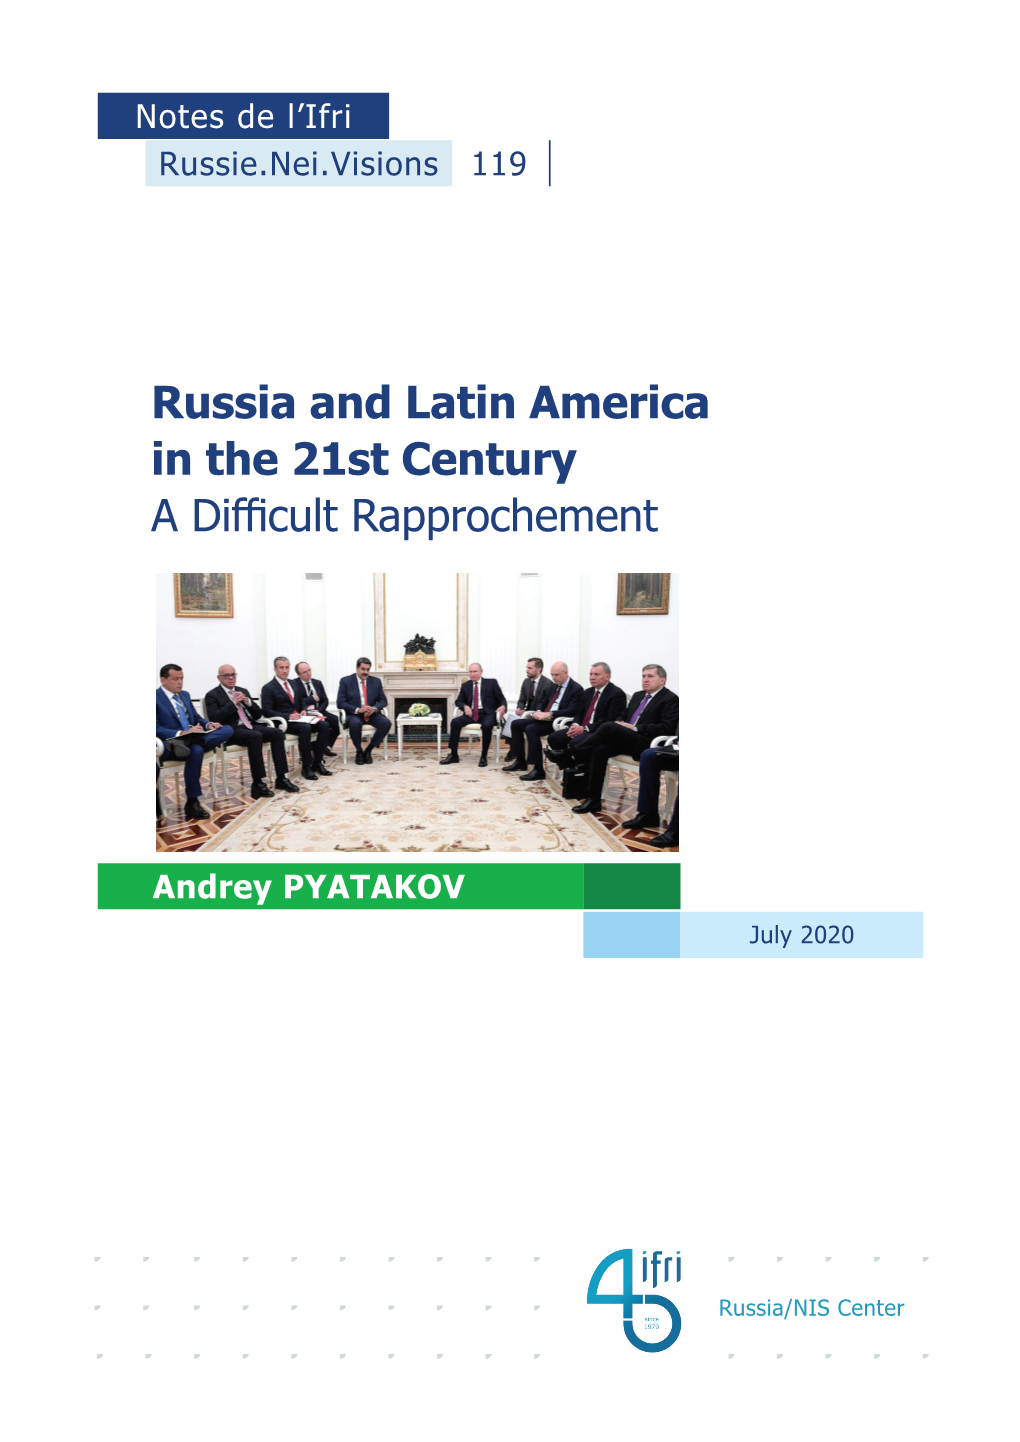 Russia and Latin America in the 21St Century a Difficult Rapprochement